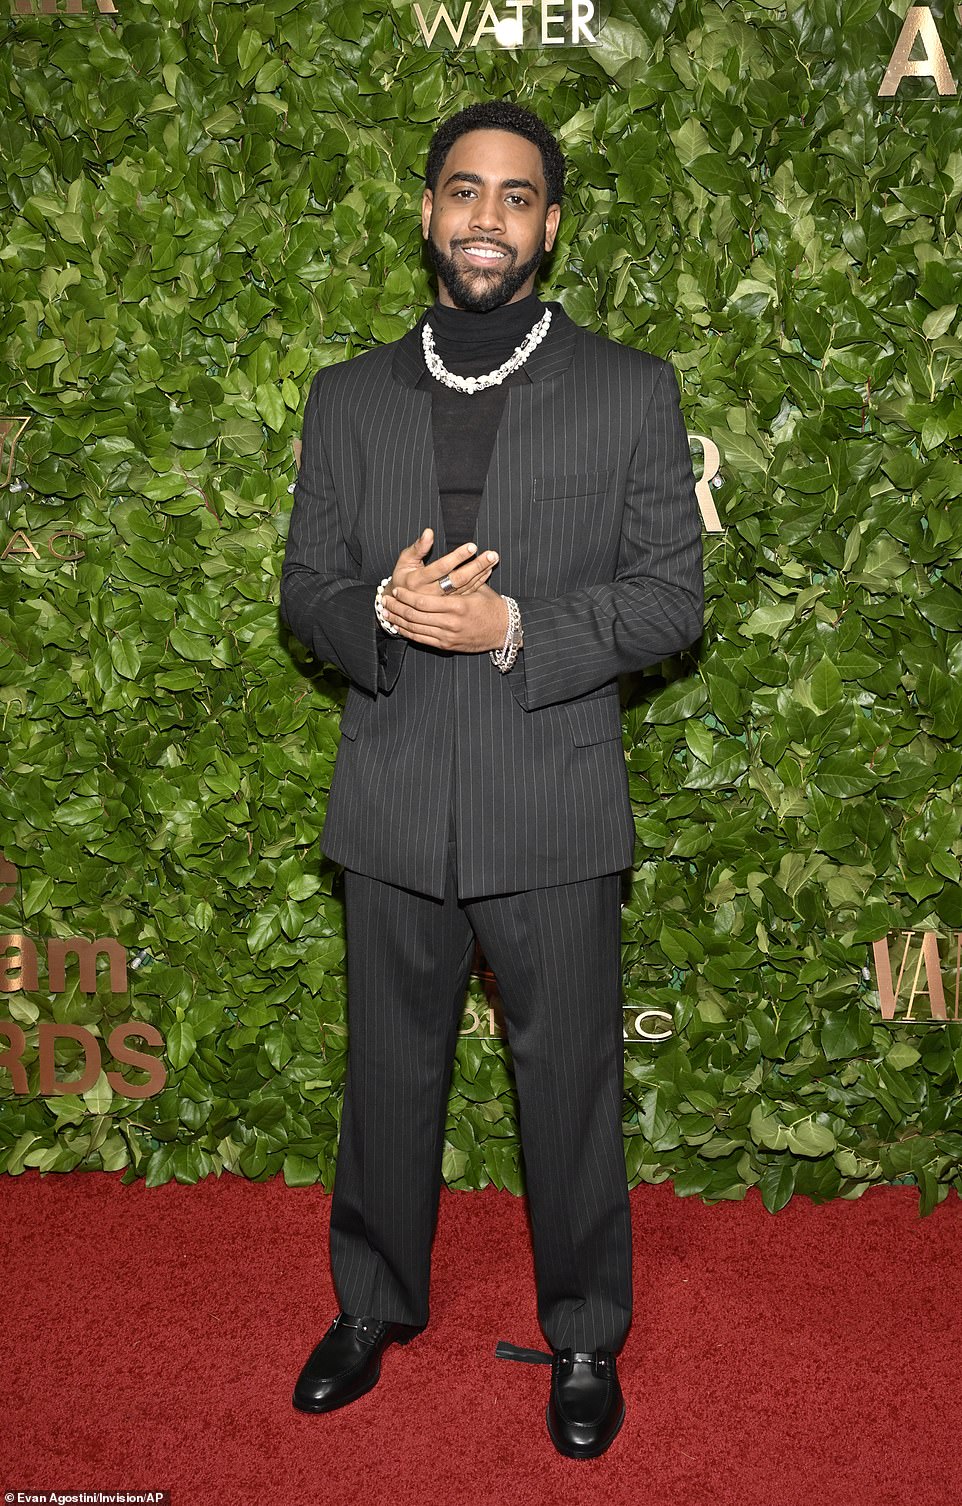 Jharrel Jerome, who was nominated for Outstanding Lead Performance in a New Series, wore a charcoal pinstriped suit